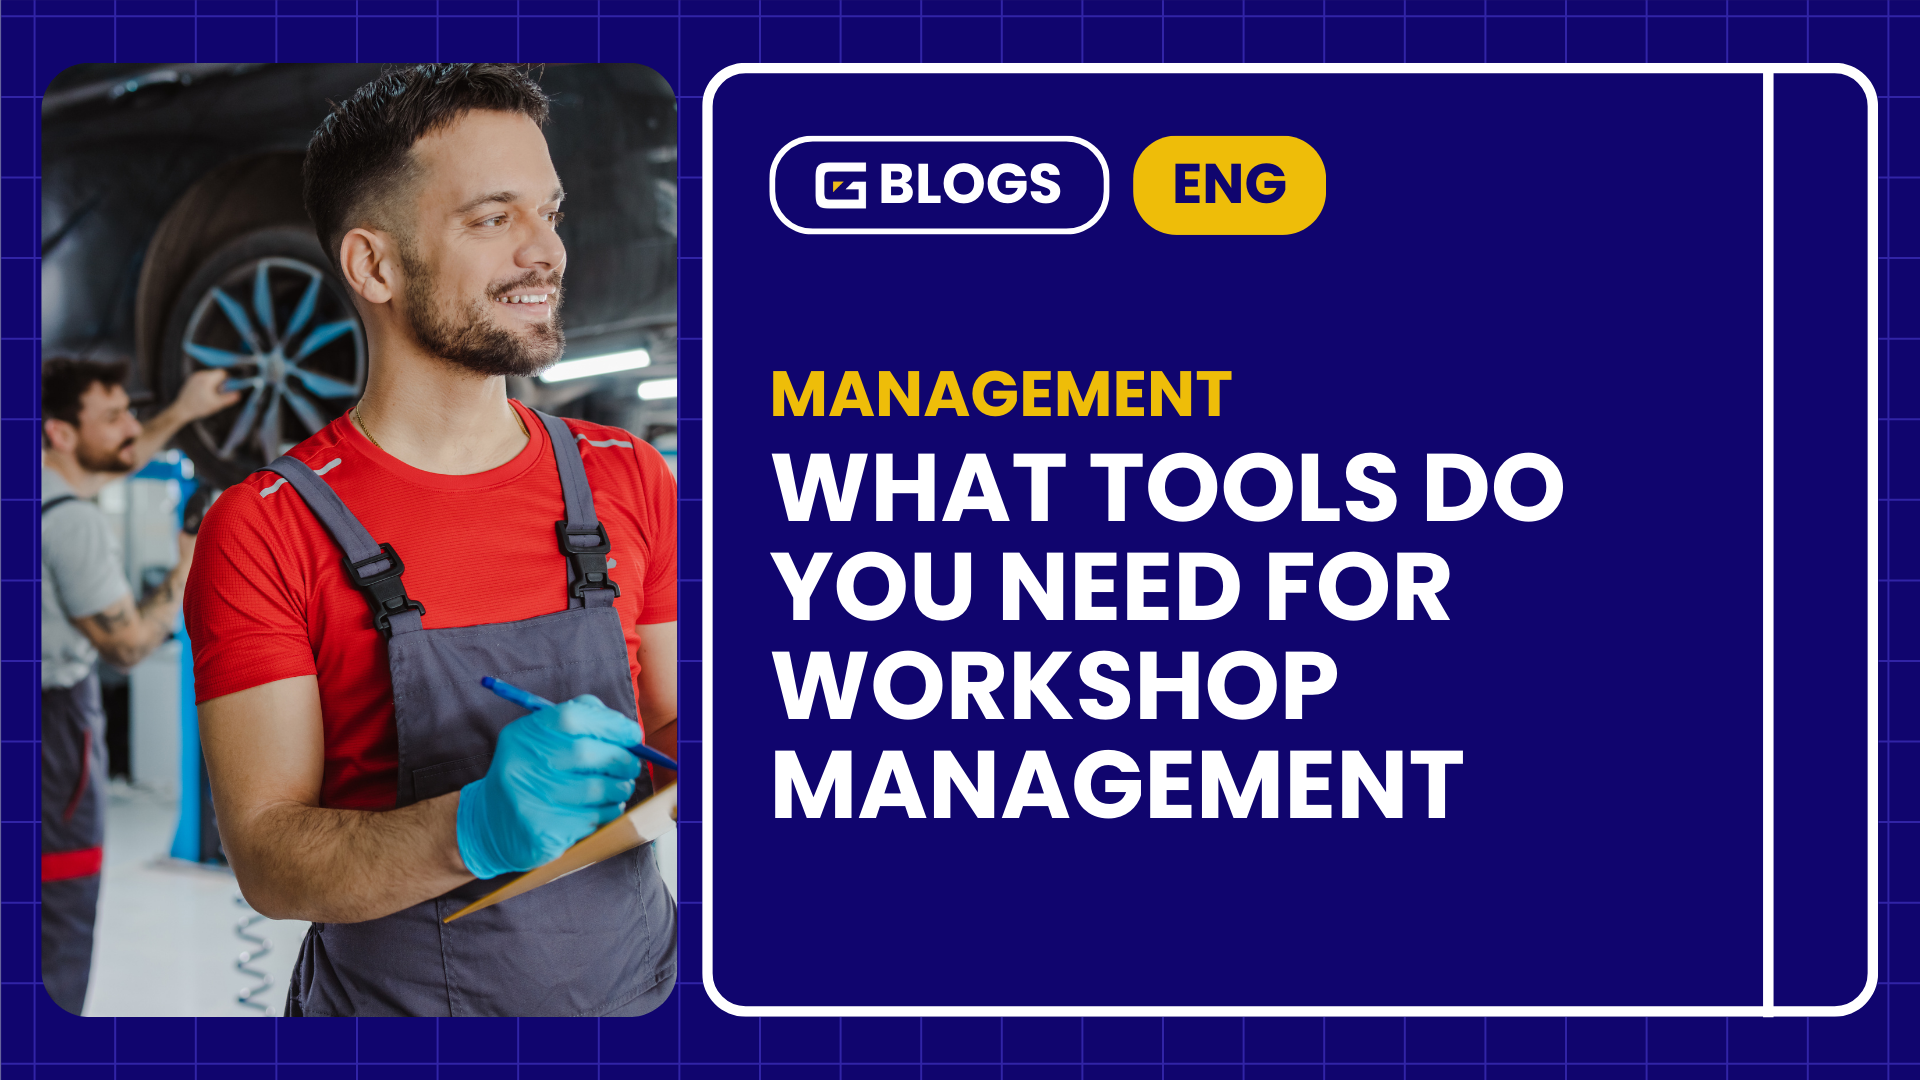 What Tools Do You Need for Workshop Management